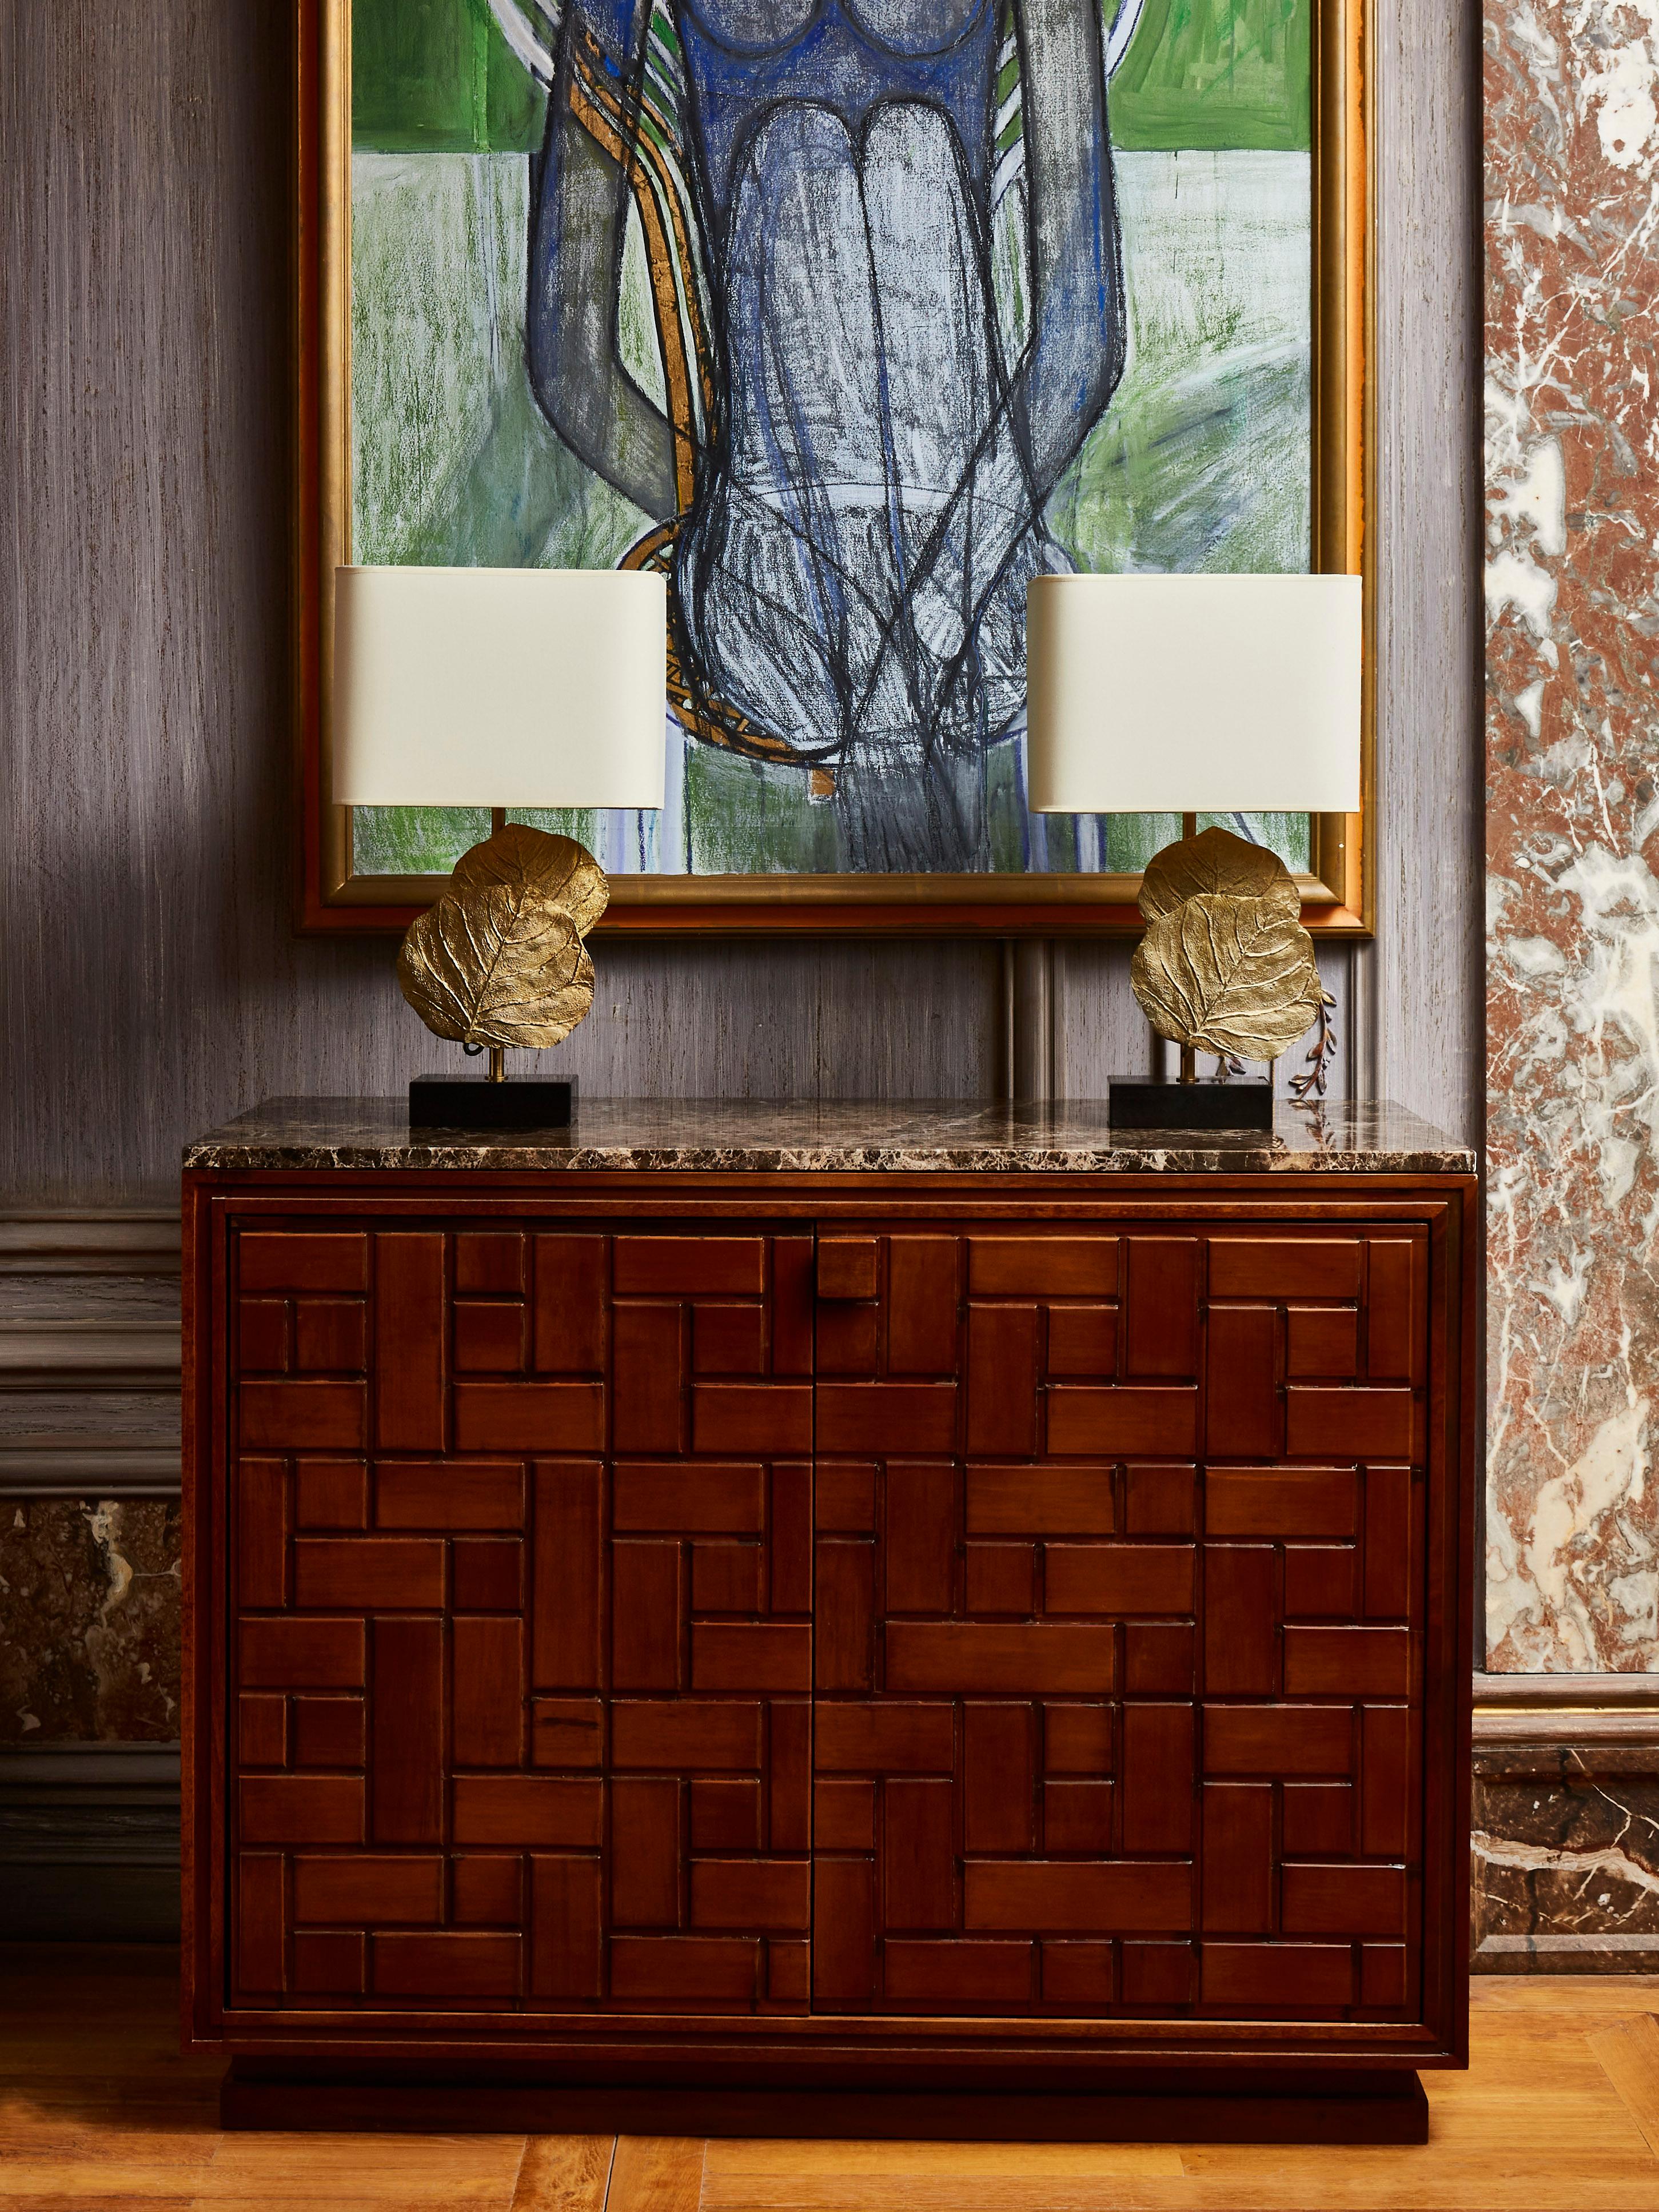 Superb vintage cabinet in wood with carved doors and marble top from Carrare.
Italy, 1970.